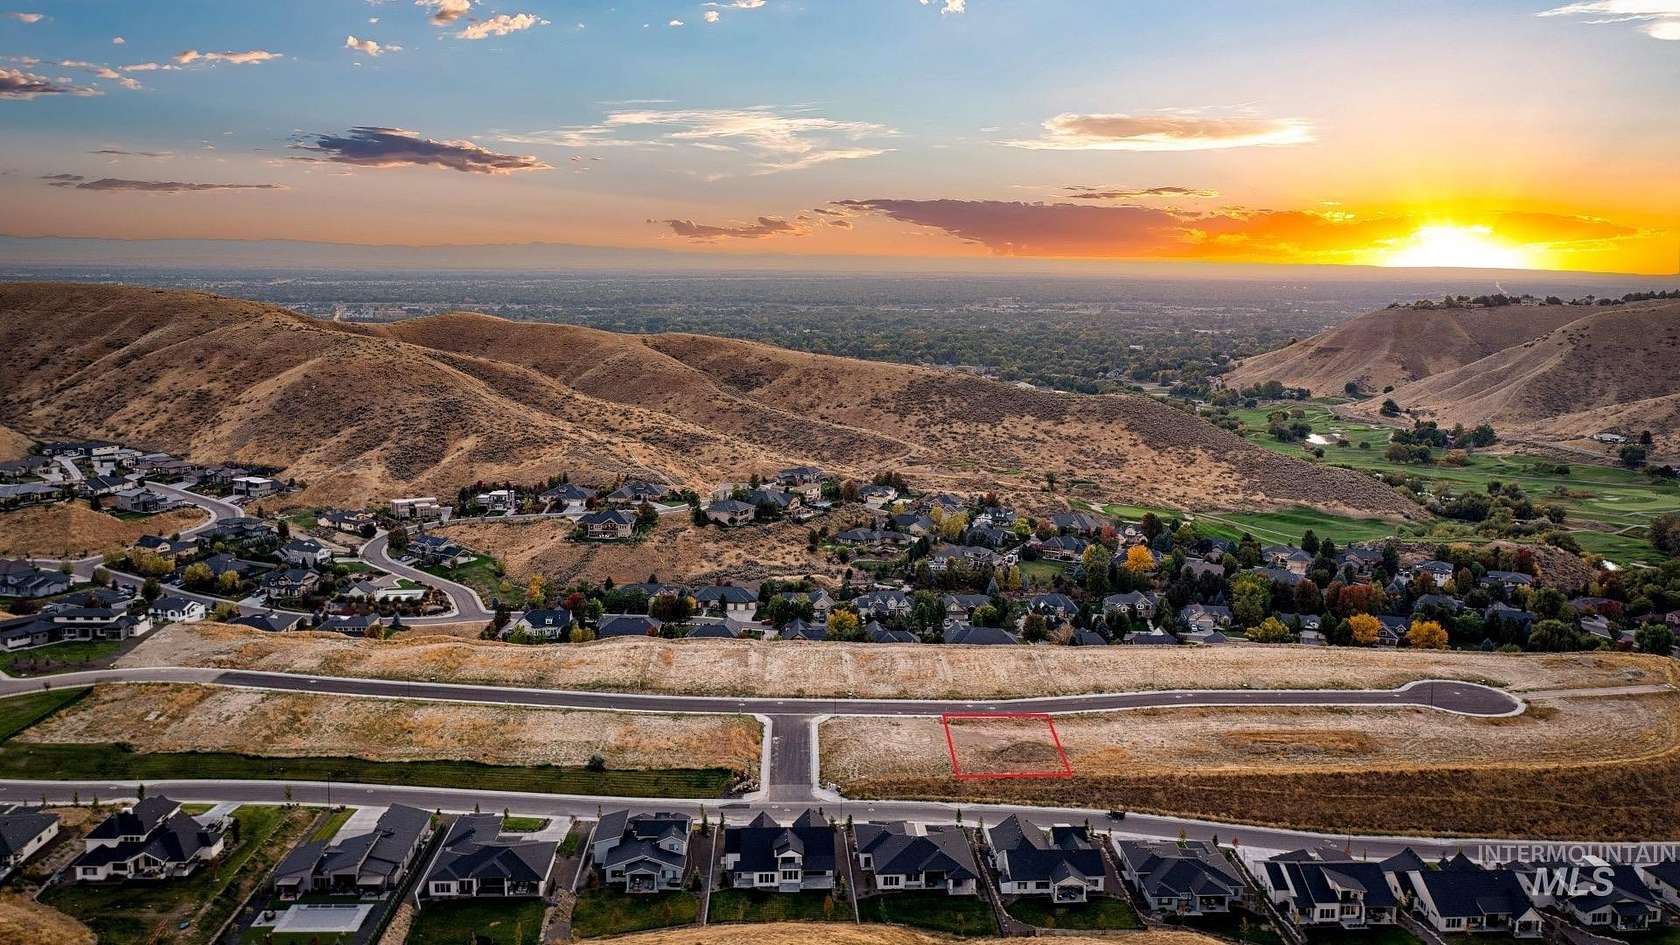 0.27 Acres of Residential Land for Sale in Boise, Idaho